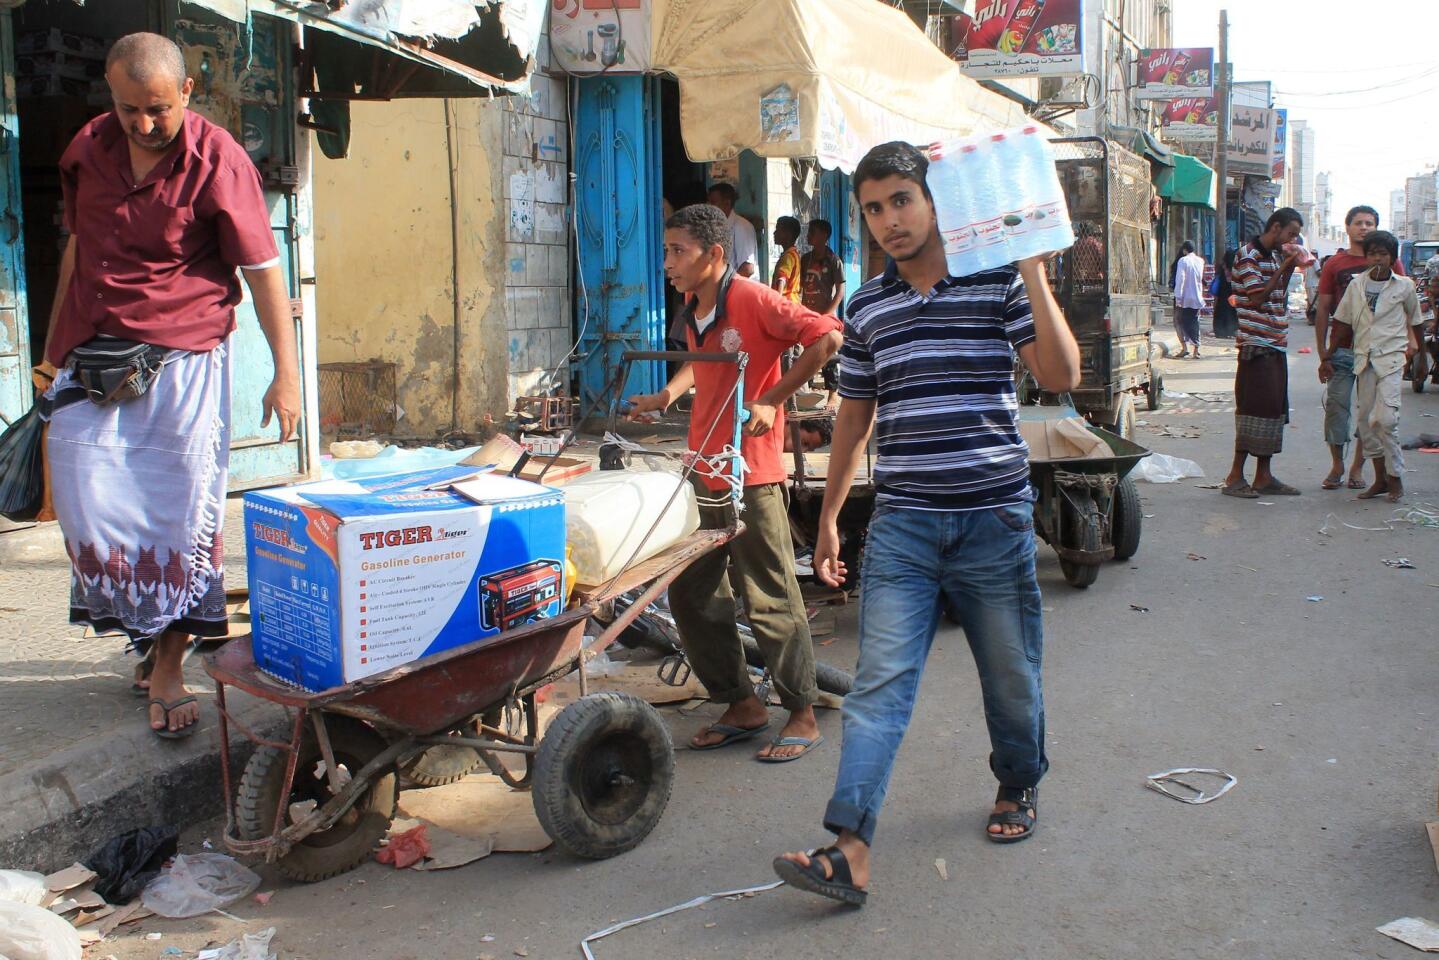 Yemenis purchase goods in the Sheikh Othman area of the southern port city of Aden on May 13, the first full day of a humanitarian pause in a bombing campaign Saudi Arabia has led against rebels in Yemen.